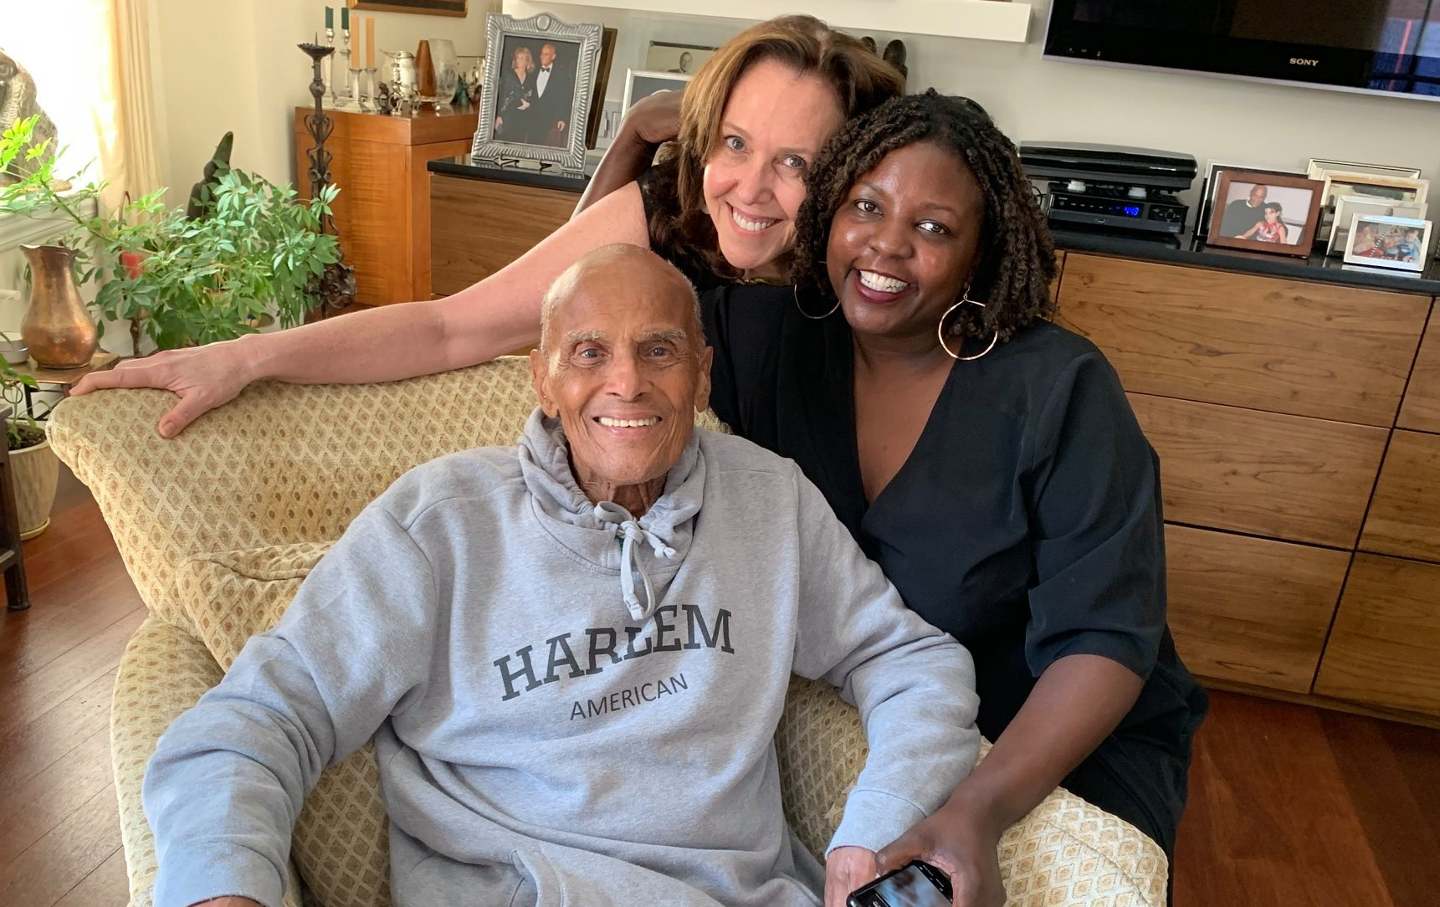 Harry Belafonte, seated in an armchair, with Joan Walsh and Yoruba Richen standing behind him. All three are smiling.